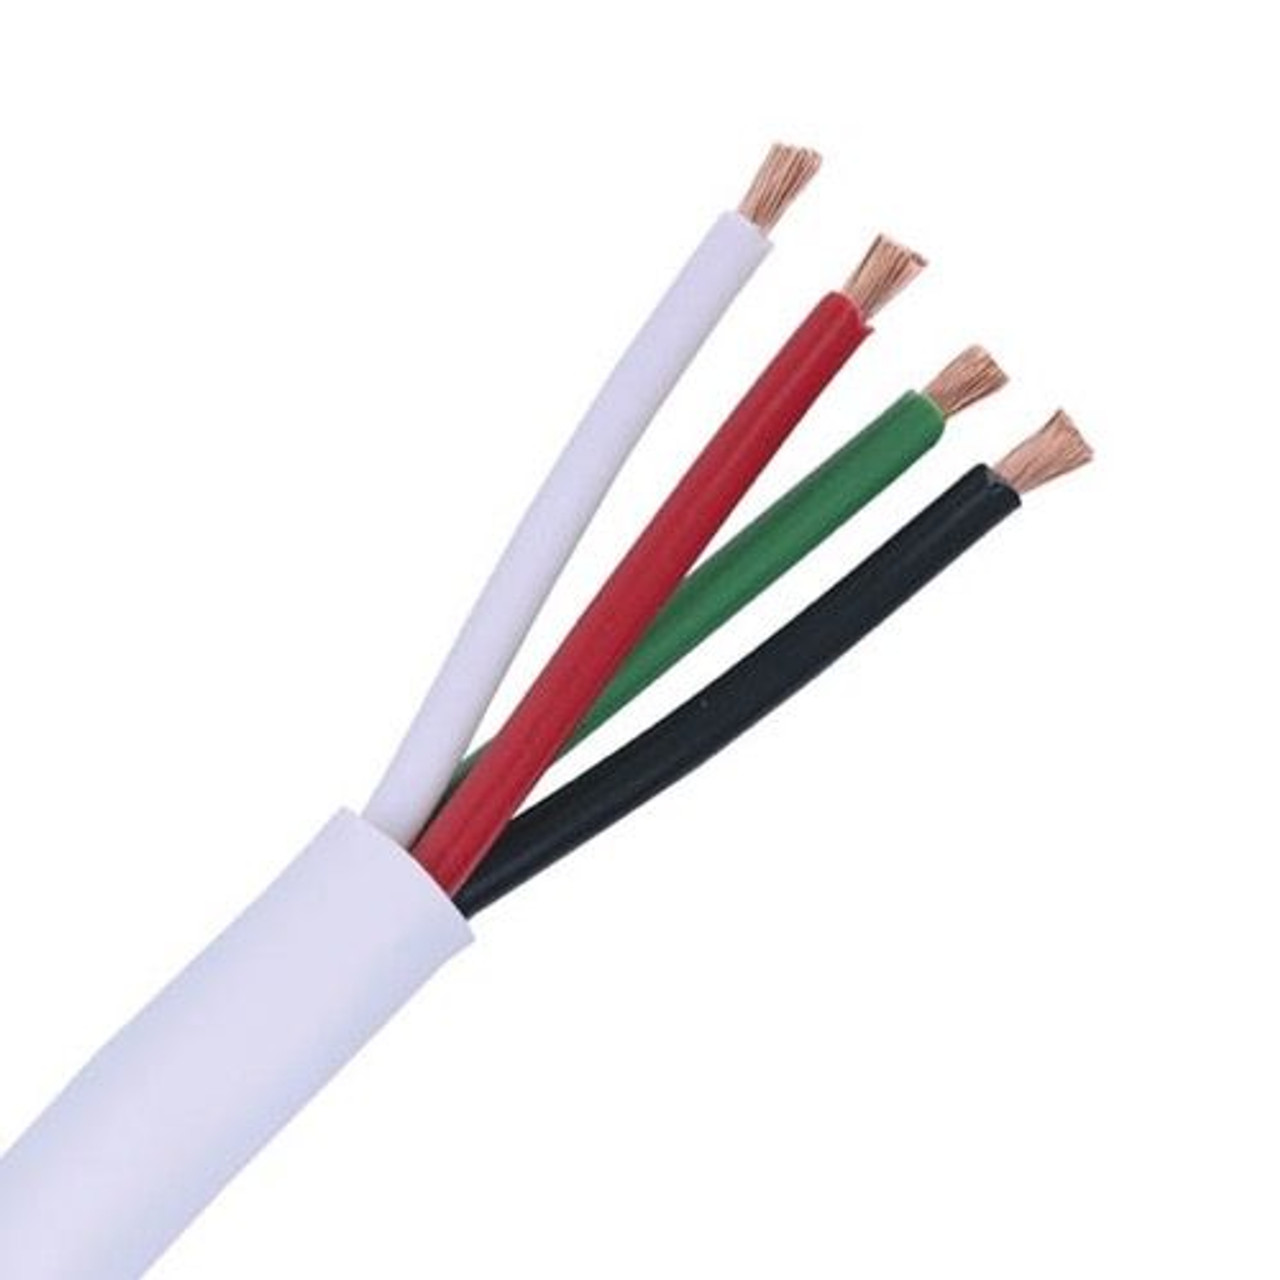 Steren 255-934WH 16 AWG Ga Bulk 4-Conductor In Wall Speaker Cable White Pro Grade Audio Digital Speaker Stranded Copper High Strand Count PVC Jacket UL Listed In-Wall Flexible Signal Transfer